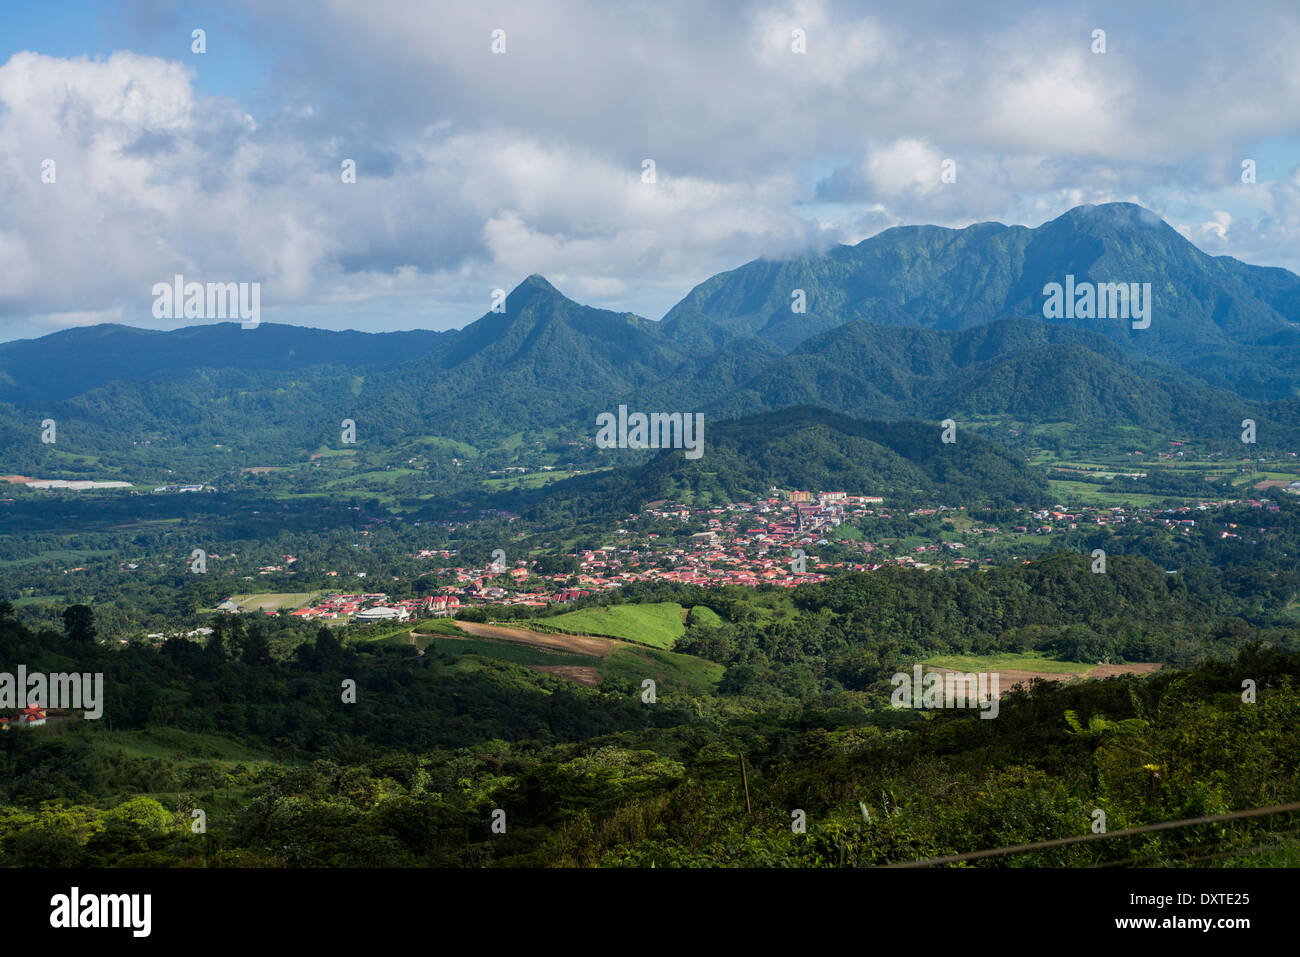 Village of Morne Rouge and the volcano area Pitons du Carbet in the background, Martinique, French West Indies Stock Photo